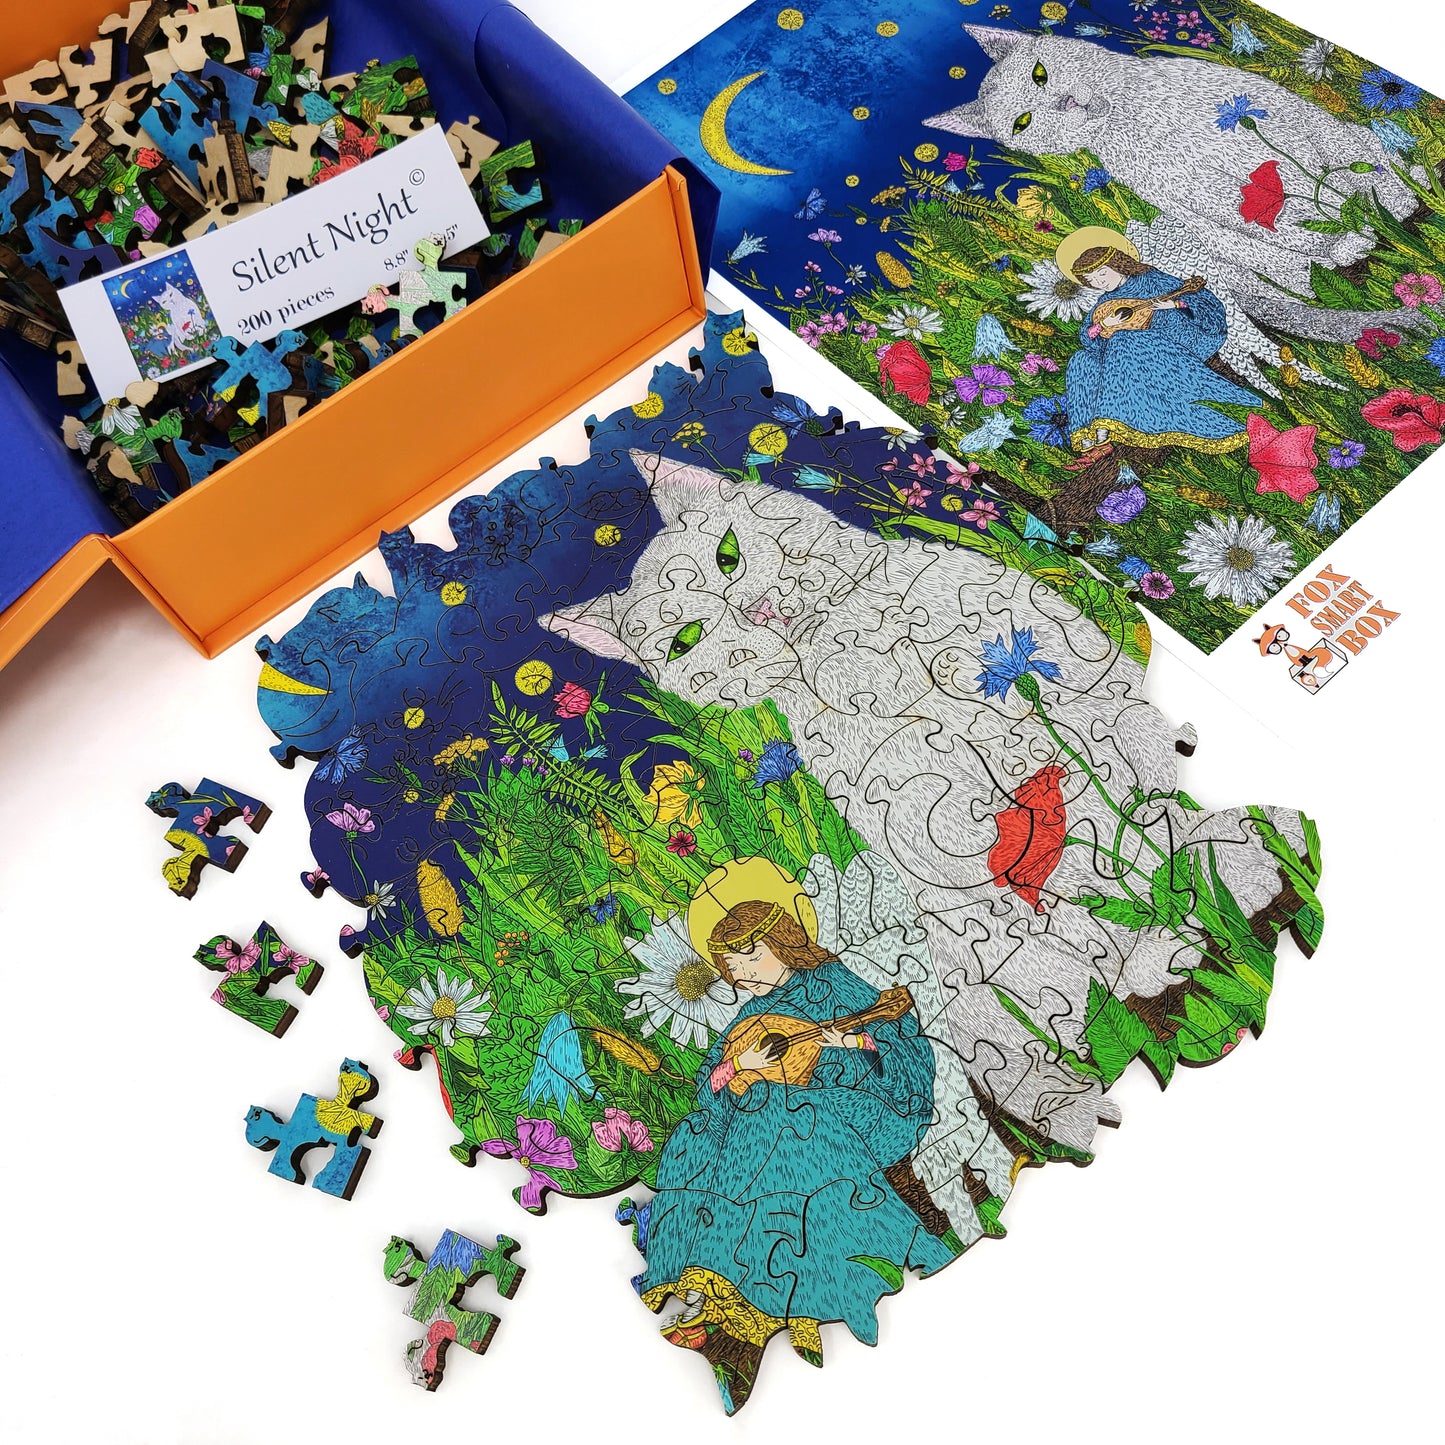 Wooden Jigsaw Puzzle with Uniquely Shaped Pieces for Adults - 200 Pieces - Silent Night